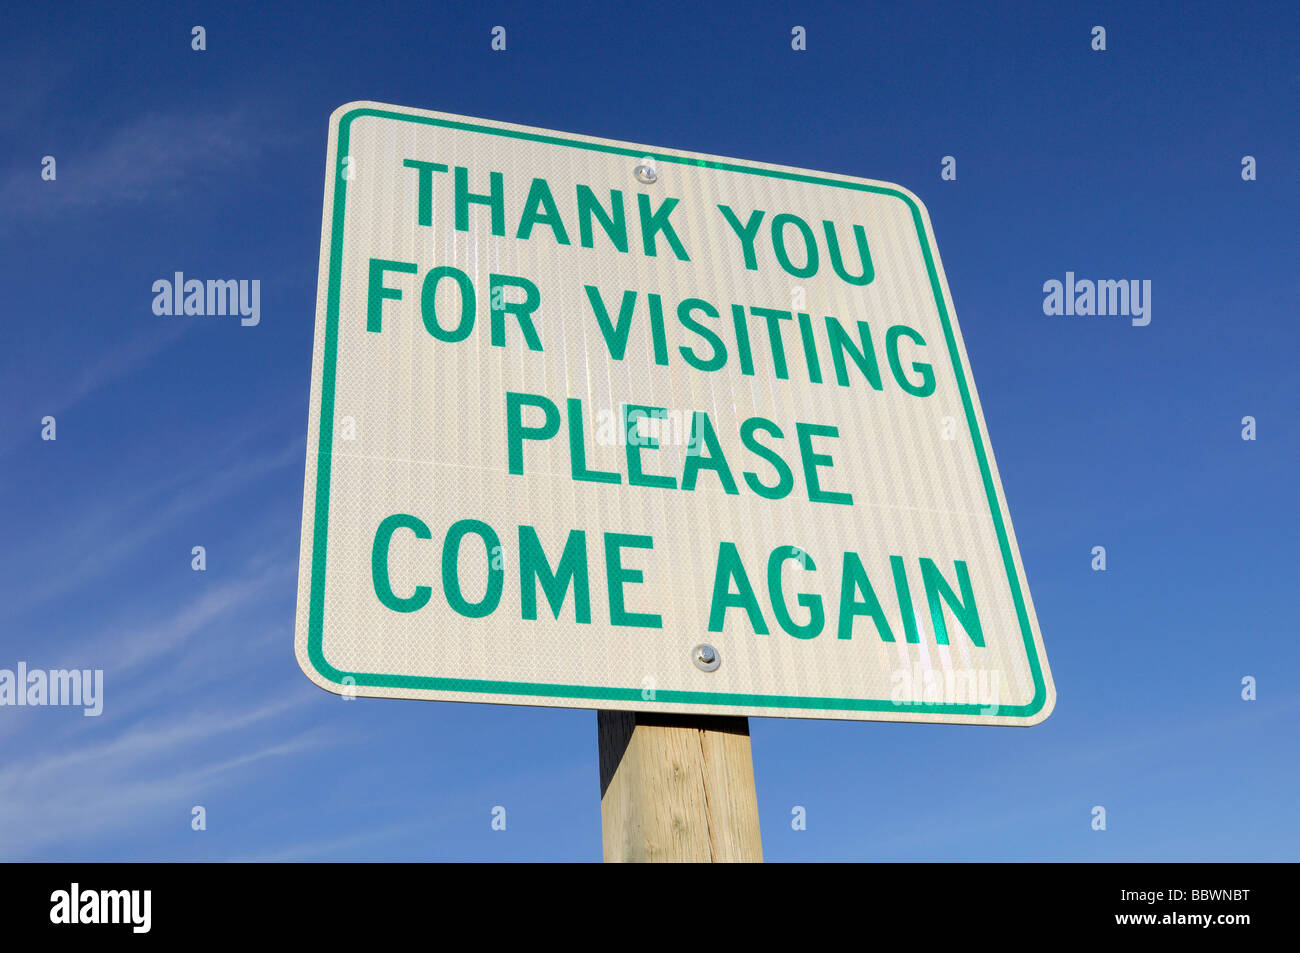 Saying Thank You High Resolution Stock Photography and Images - Alamy